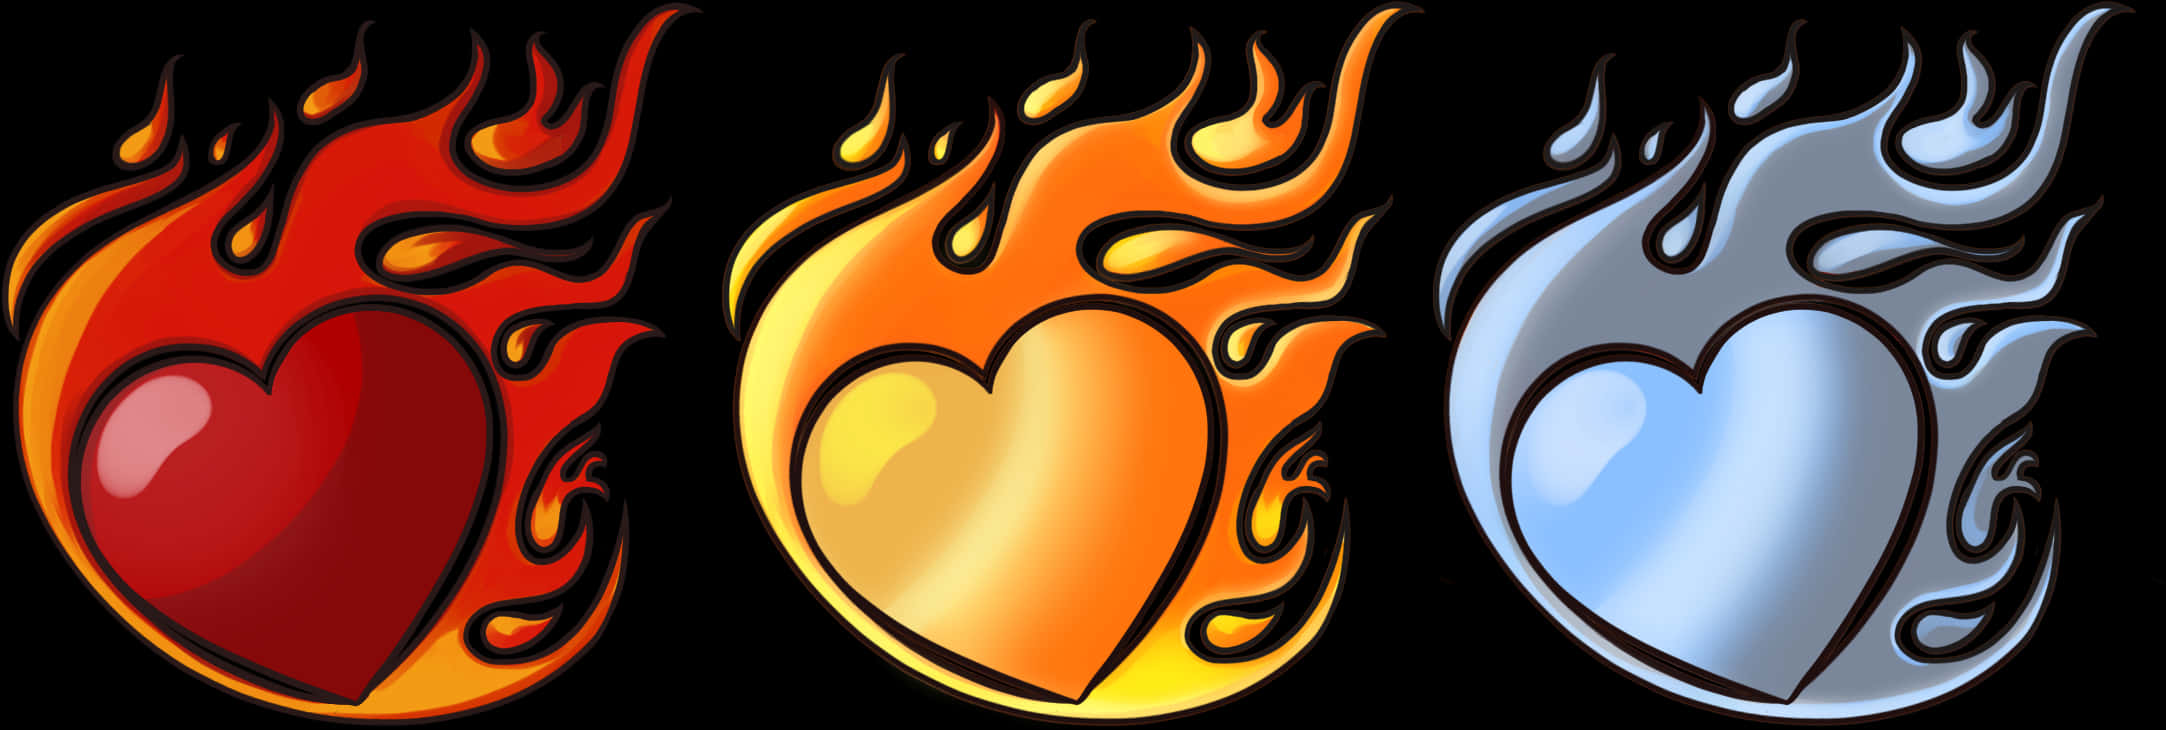 Flaming_ Hearts_ Triptych